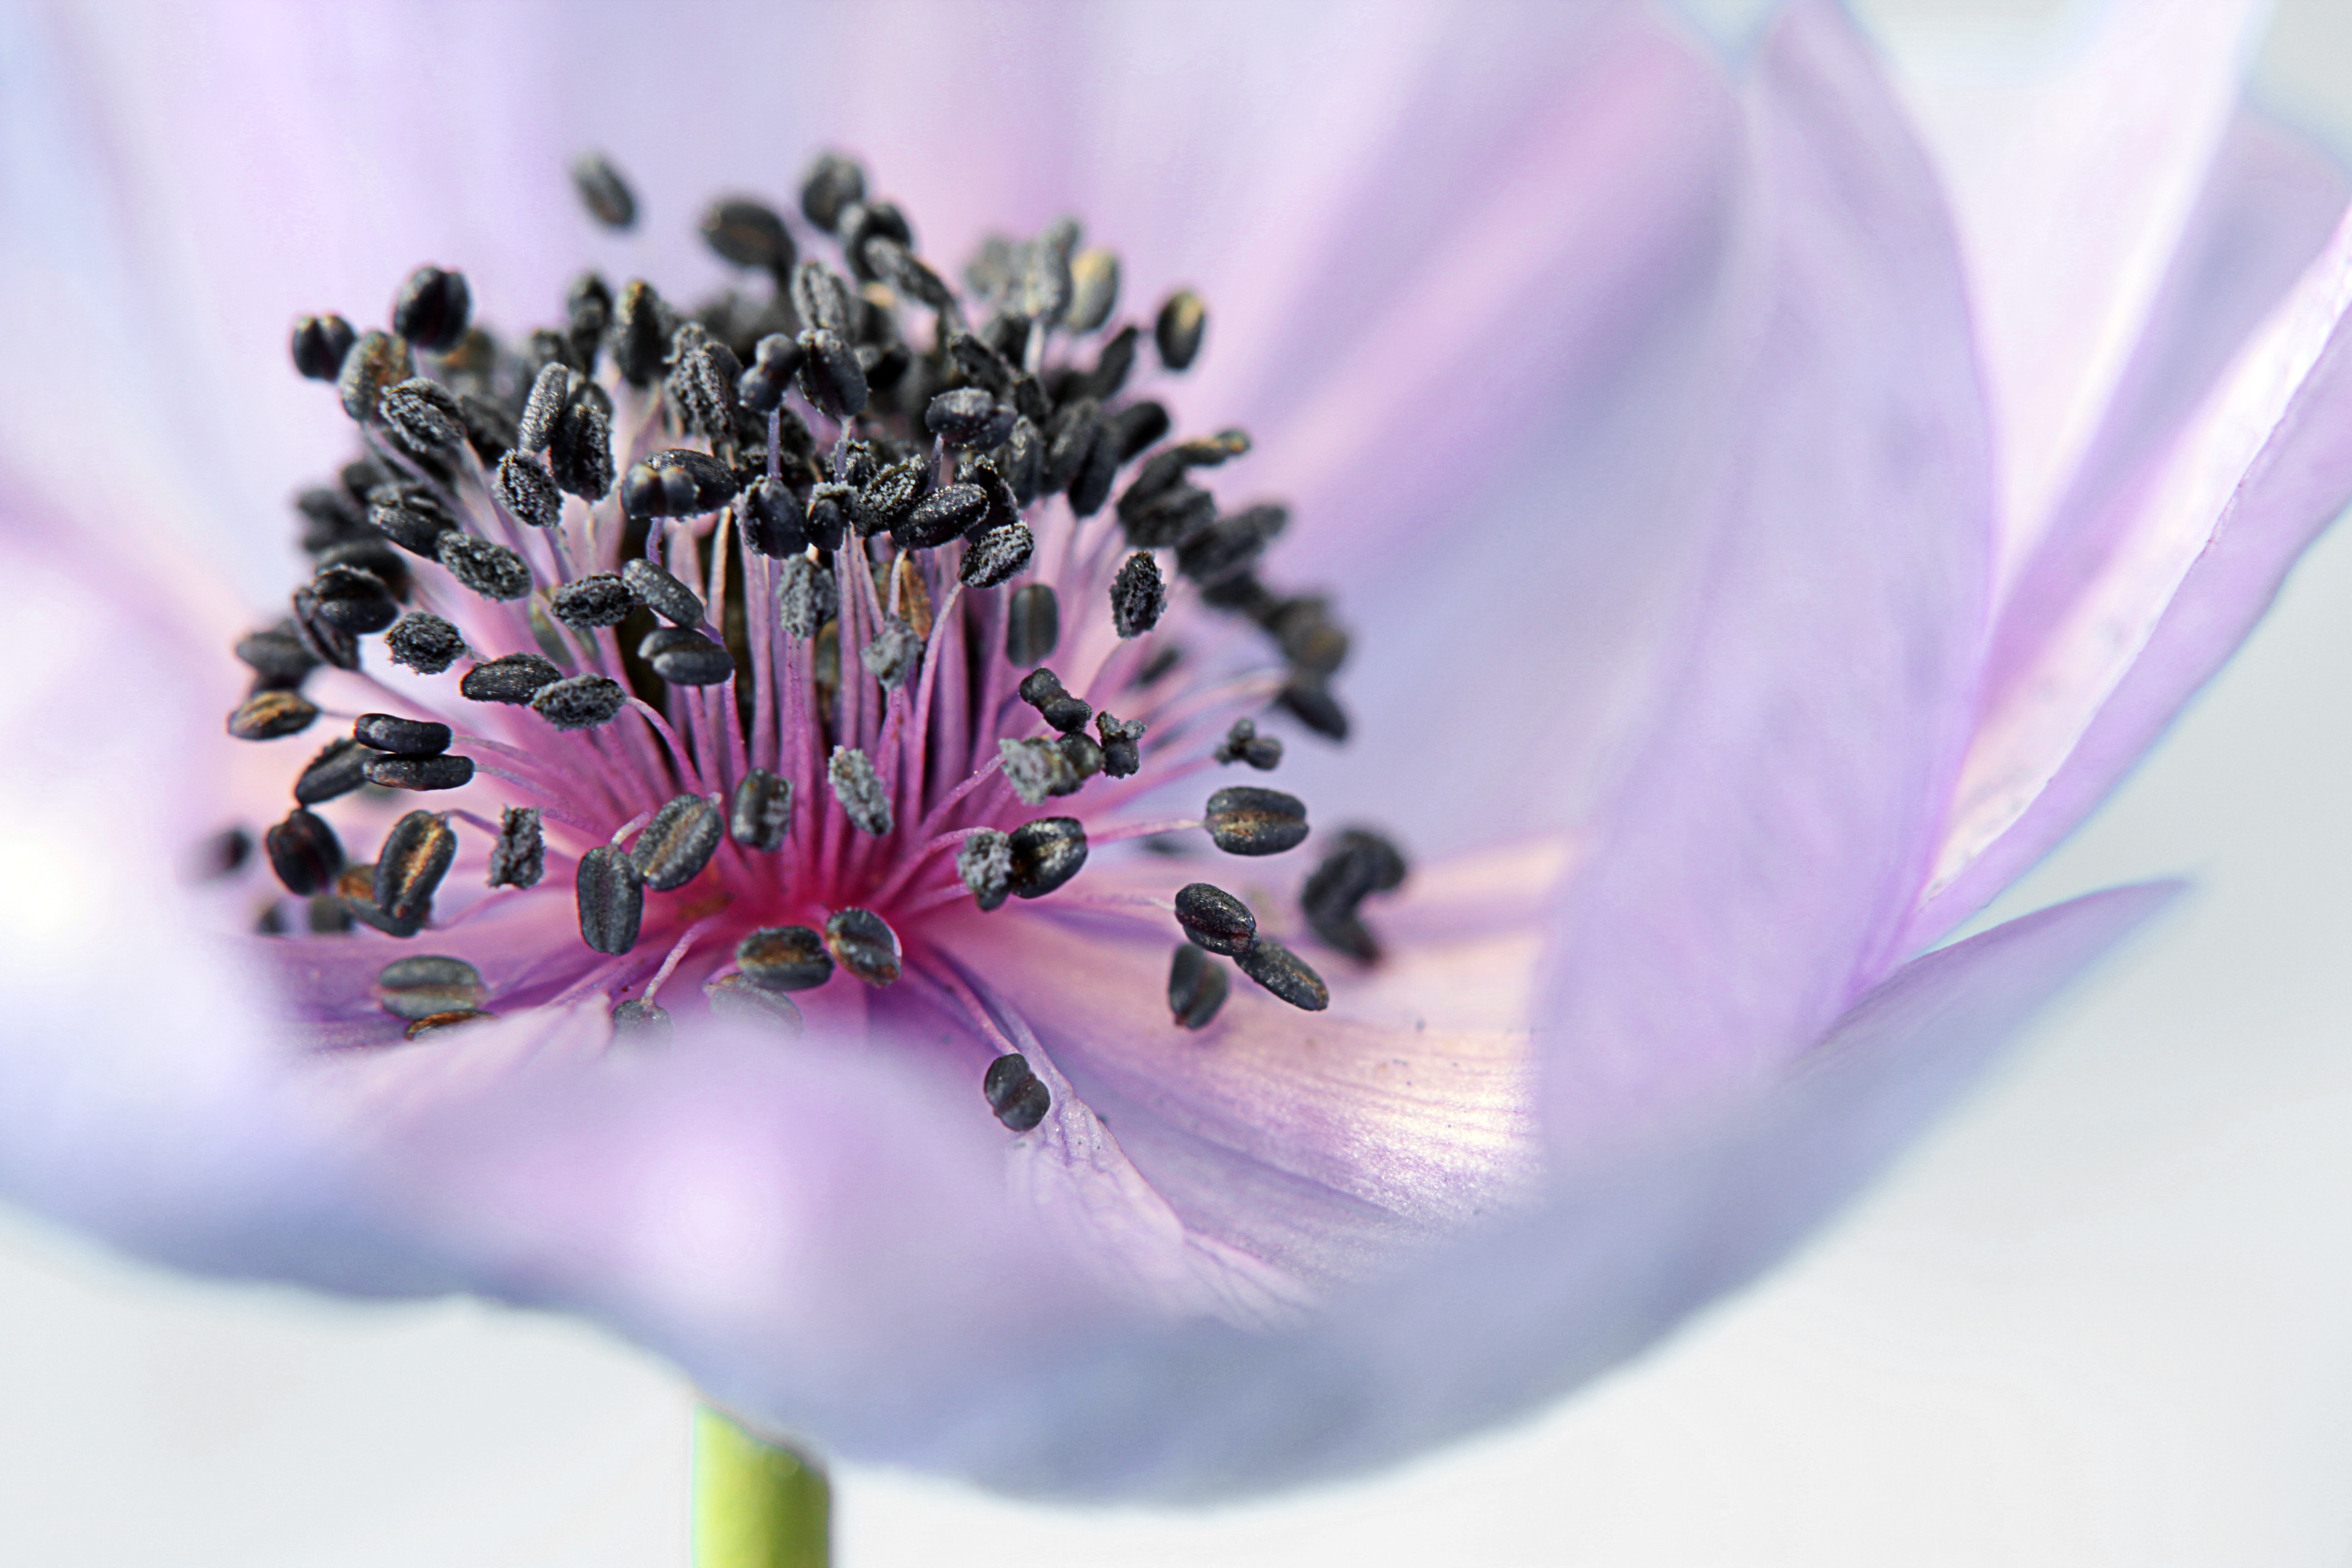 Free photo: Pink Whit and Black Flower - Bloom, Blossom, Close-up ...